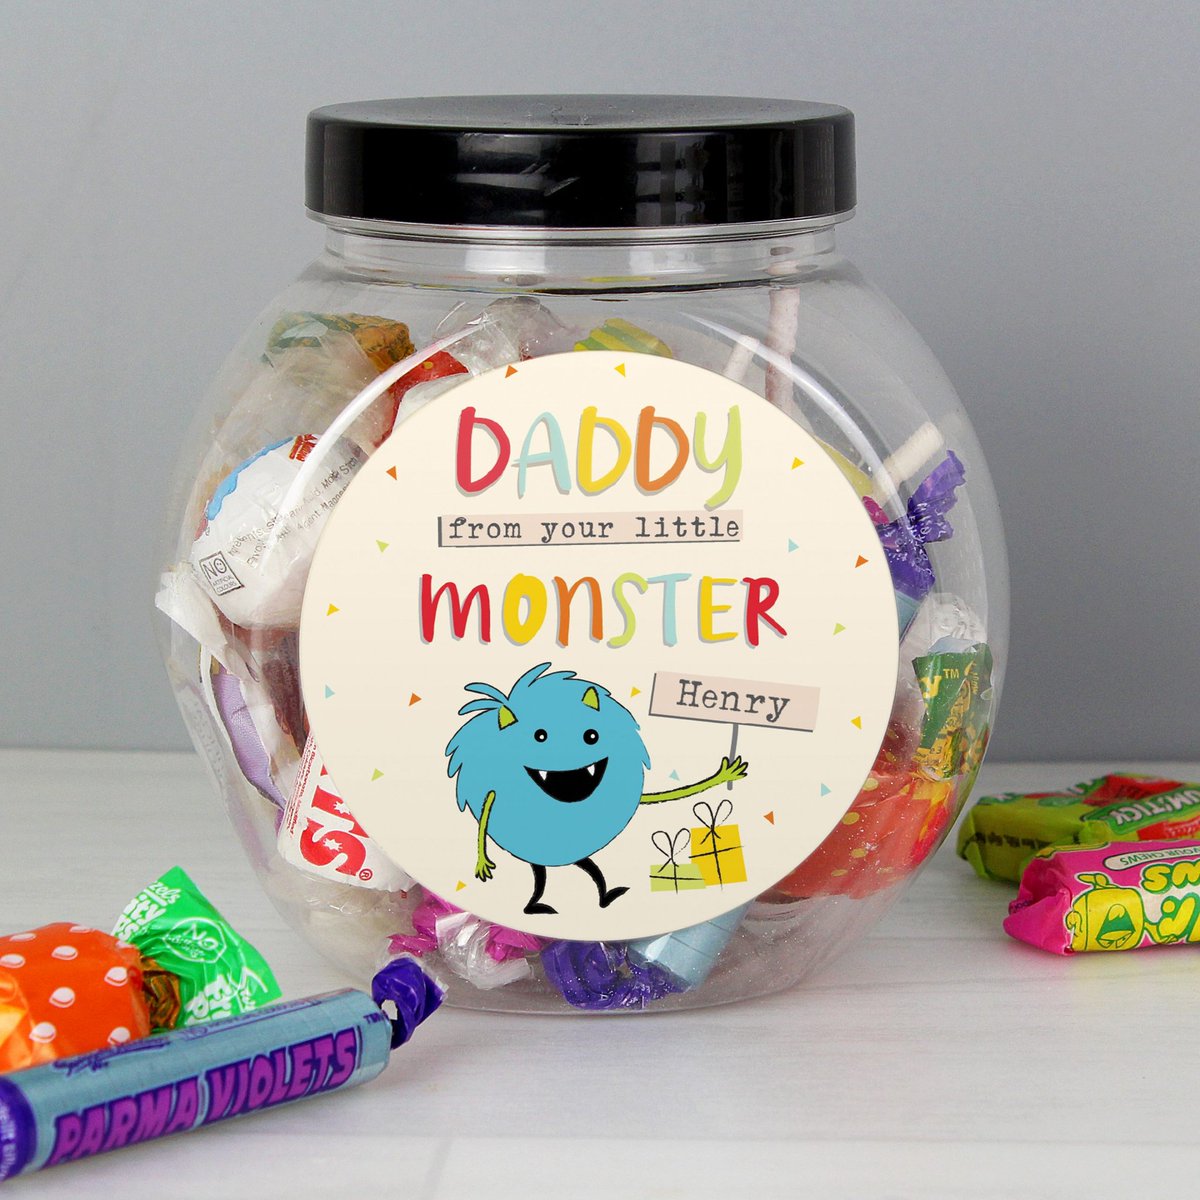 A sweet treat for Dad this Father’s Day xclusivegifts.co.uk/product/person…
#sweetjar #sweetshop #freegiftbox #giftideas #picknmix #smallbusiness #sweetcones #detalles #sweetjars #chocolate #christmas #pickandmix  #chocolatelover  #chocolatejar #personalised #marshmallows #MHHSBD